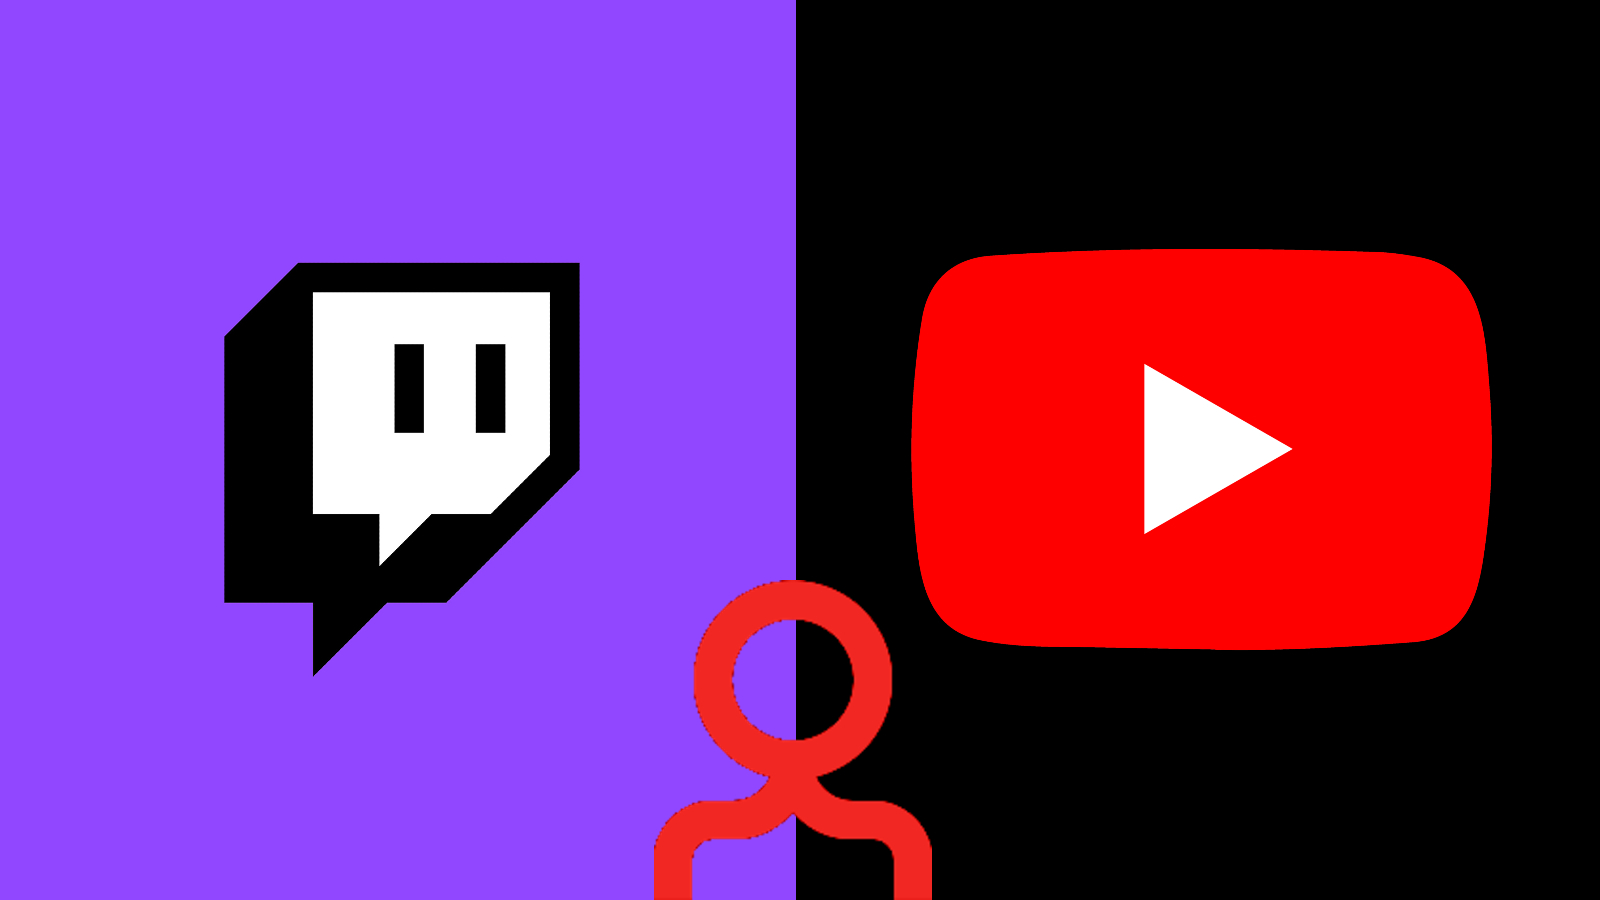 Viewership On Twitch And  Live Was Booming In Record-Breaking First  Quarter - Tubefilter